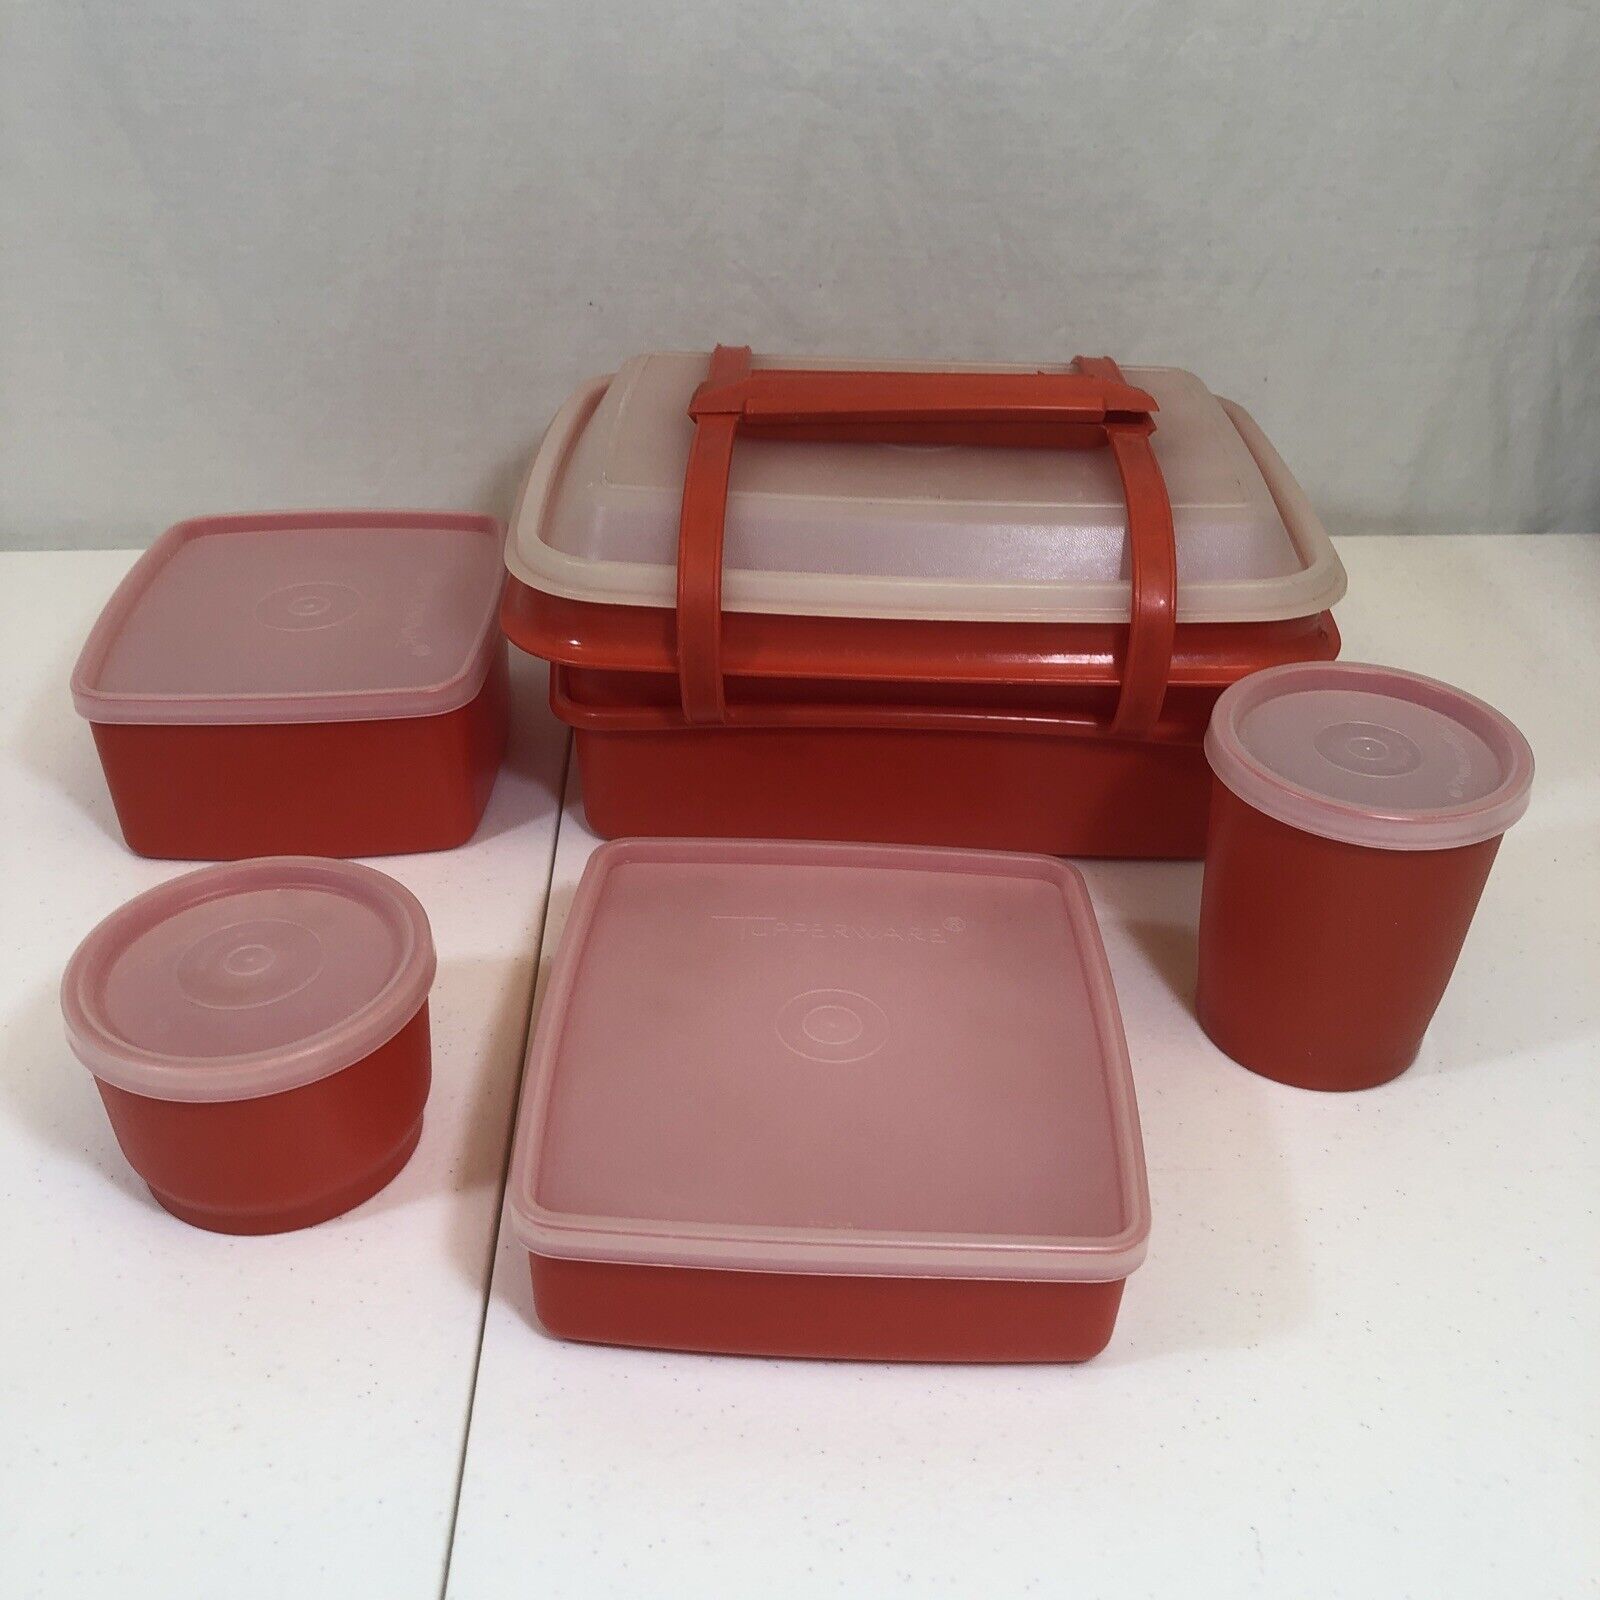 Vintage Tupperware Lunch Box 11 Piece Set Pack-N-Carry Retro Paprika Red